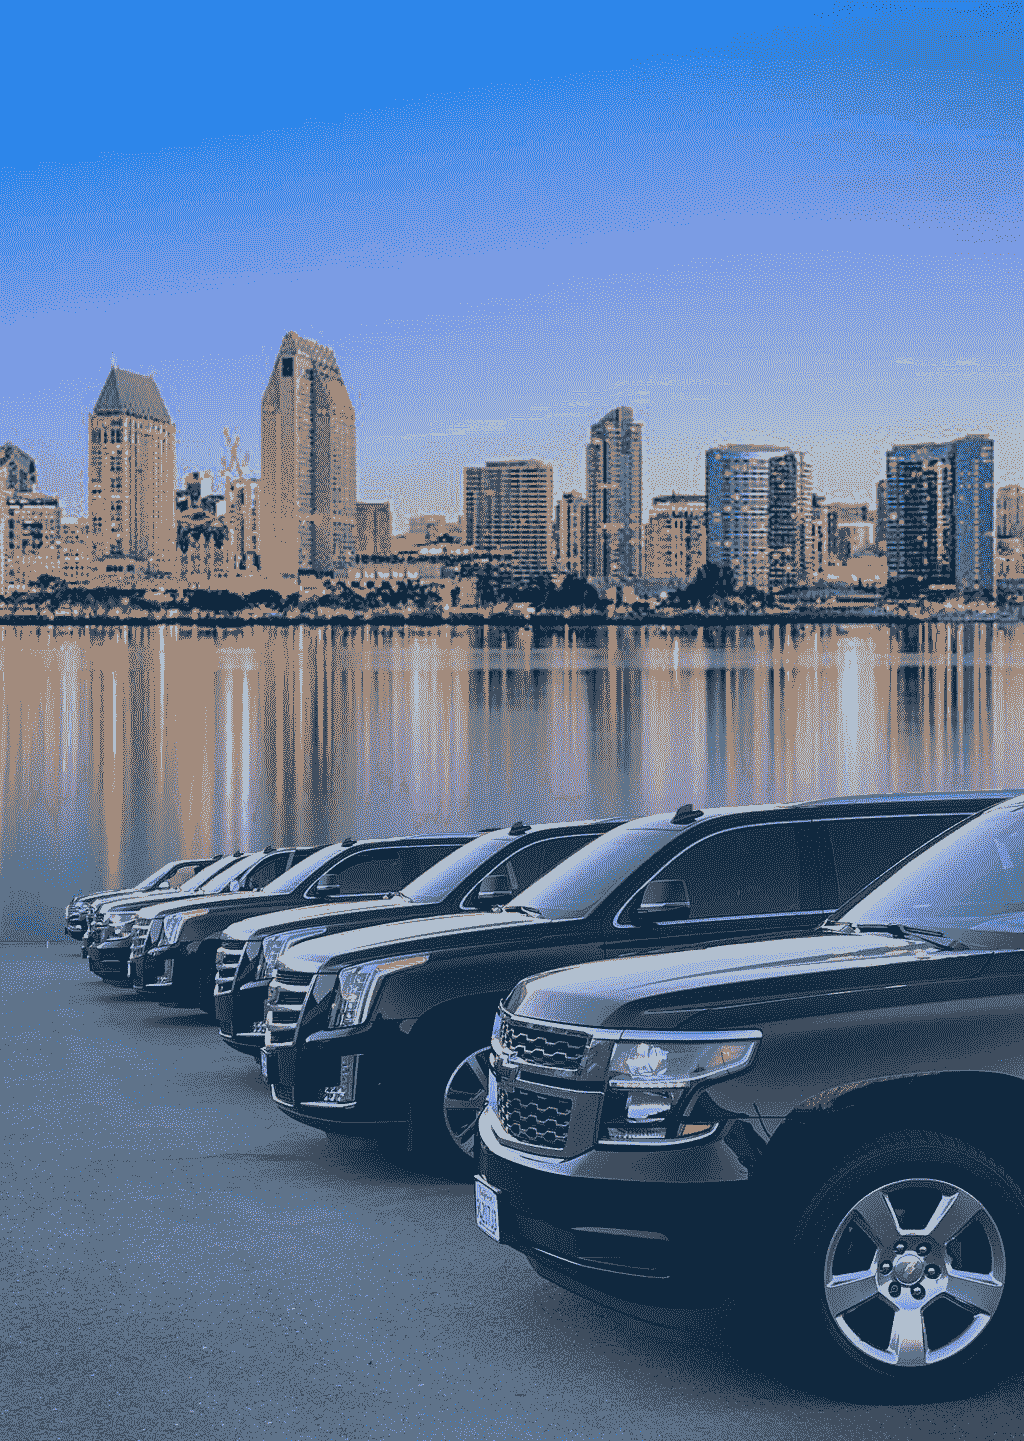 LAX to San diego limo service